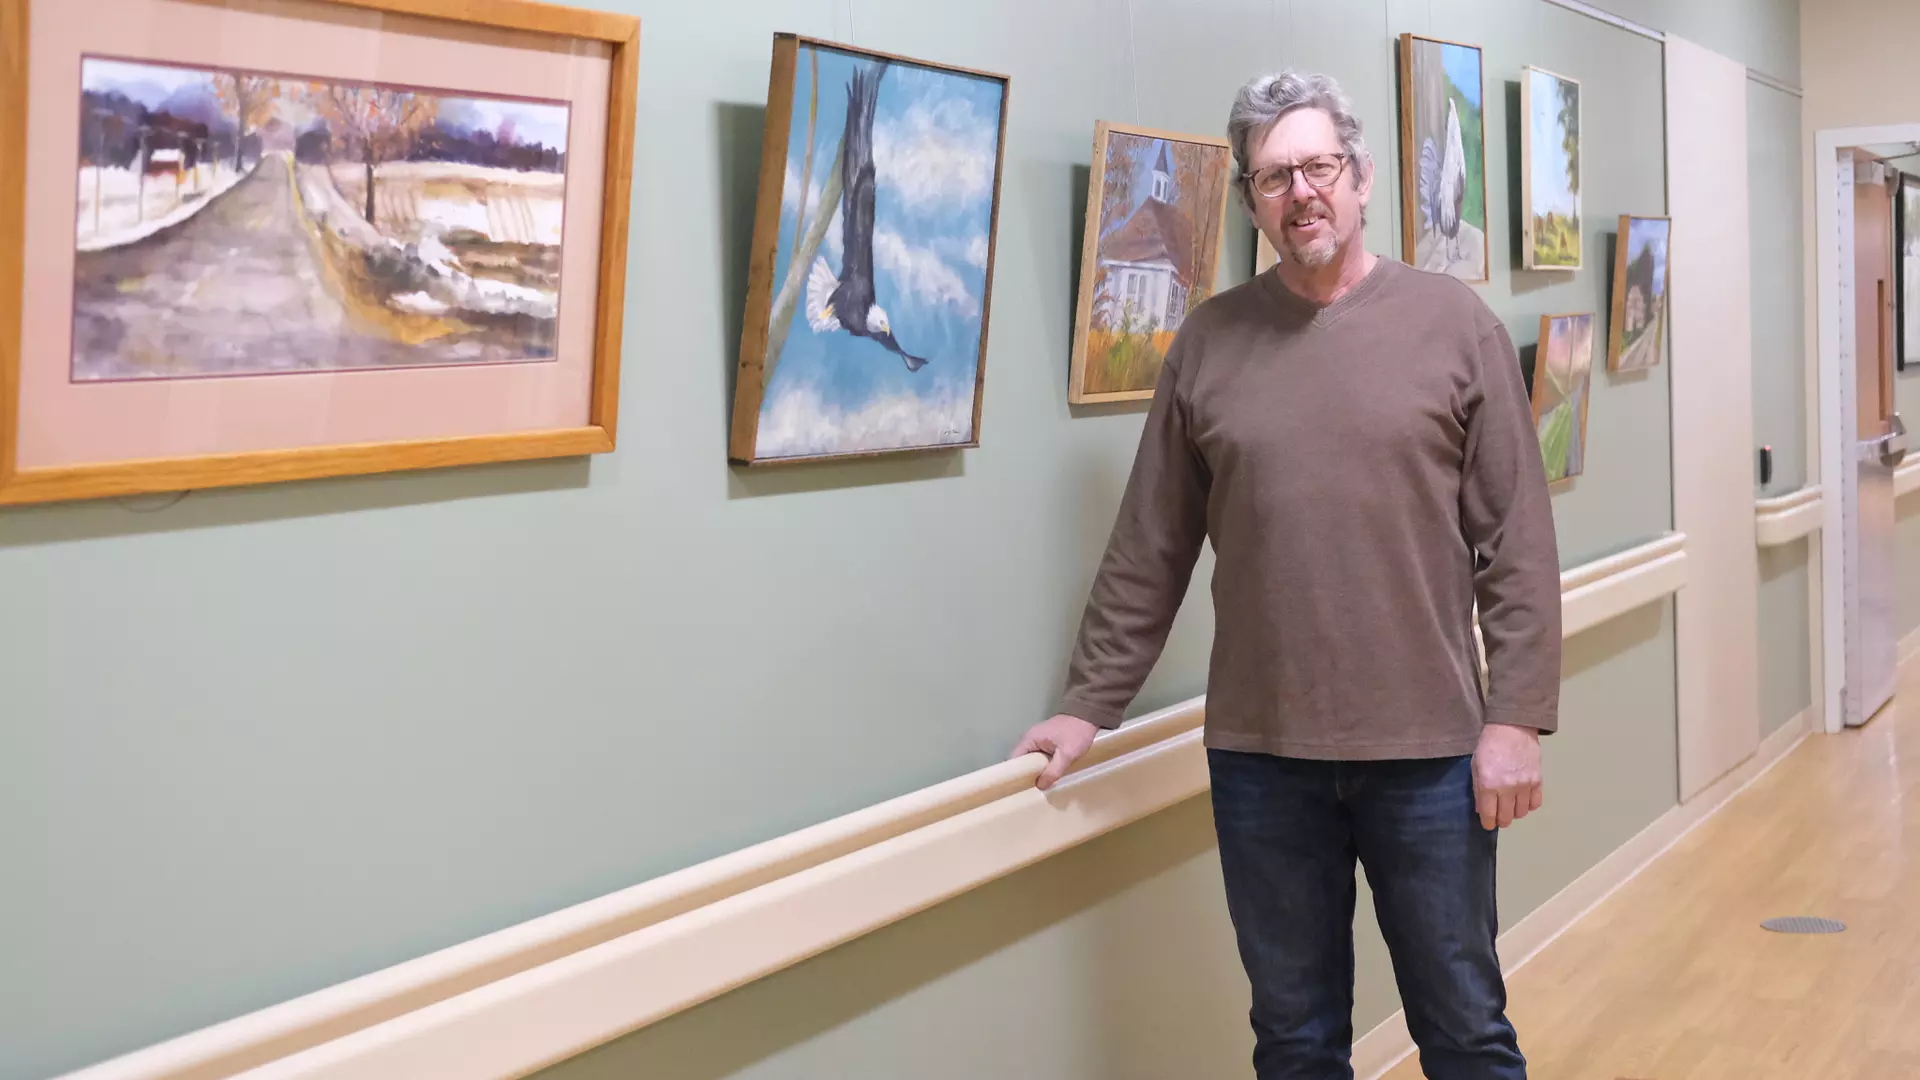 Local artist standing next to painting in hospital hallway.